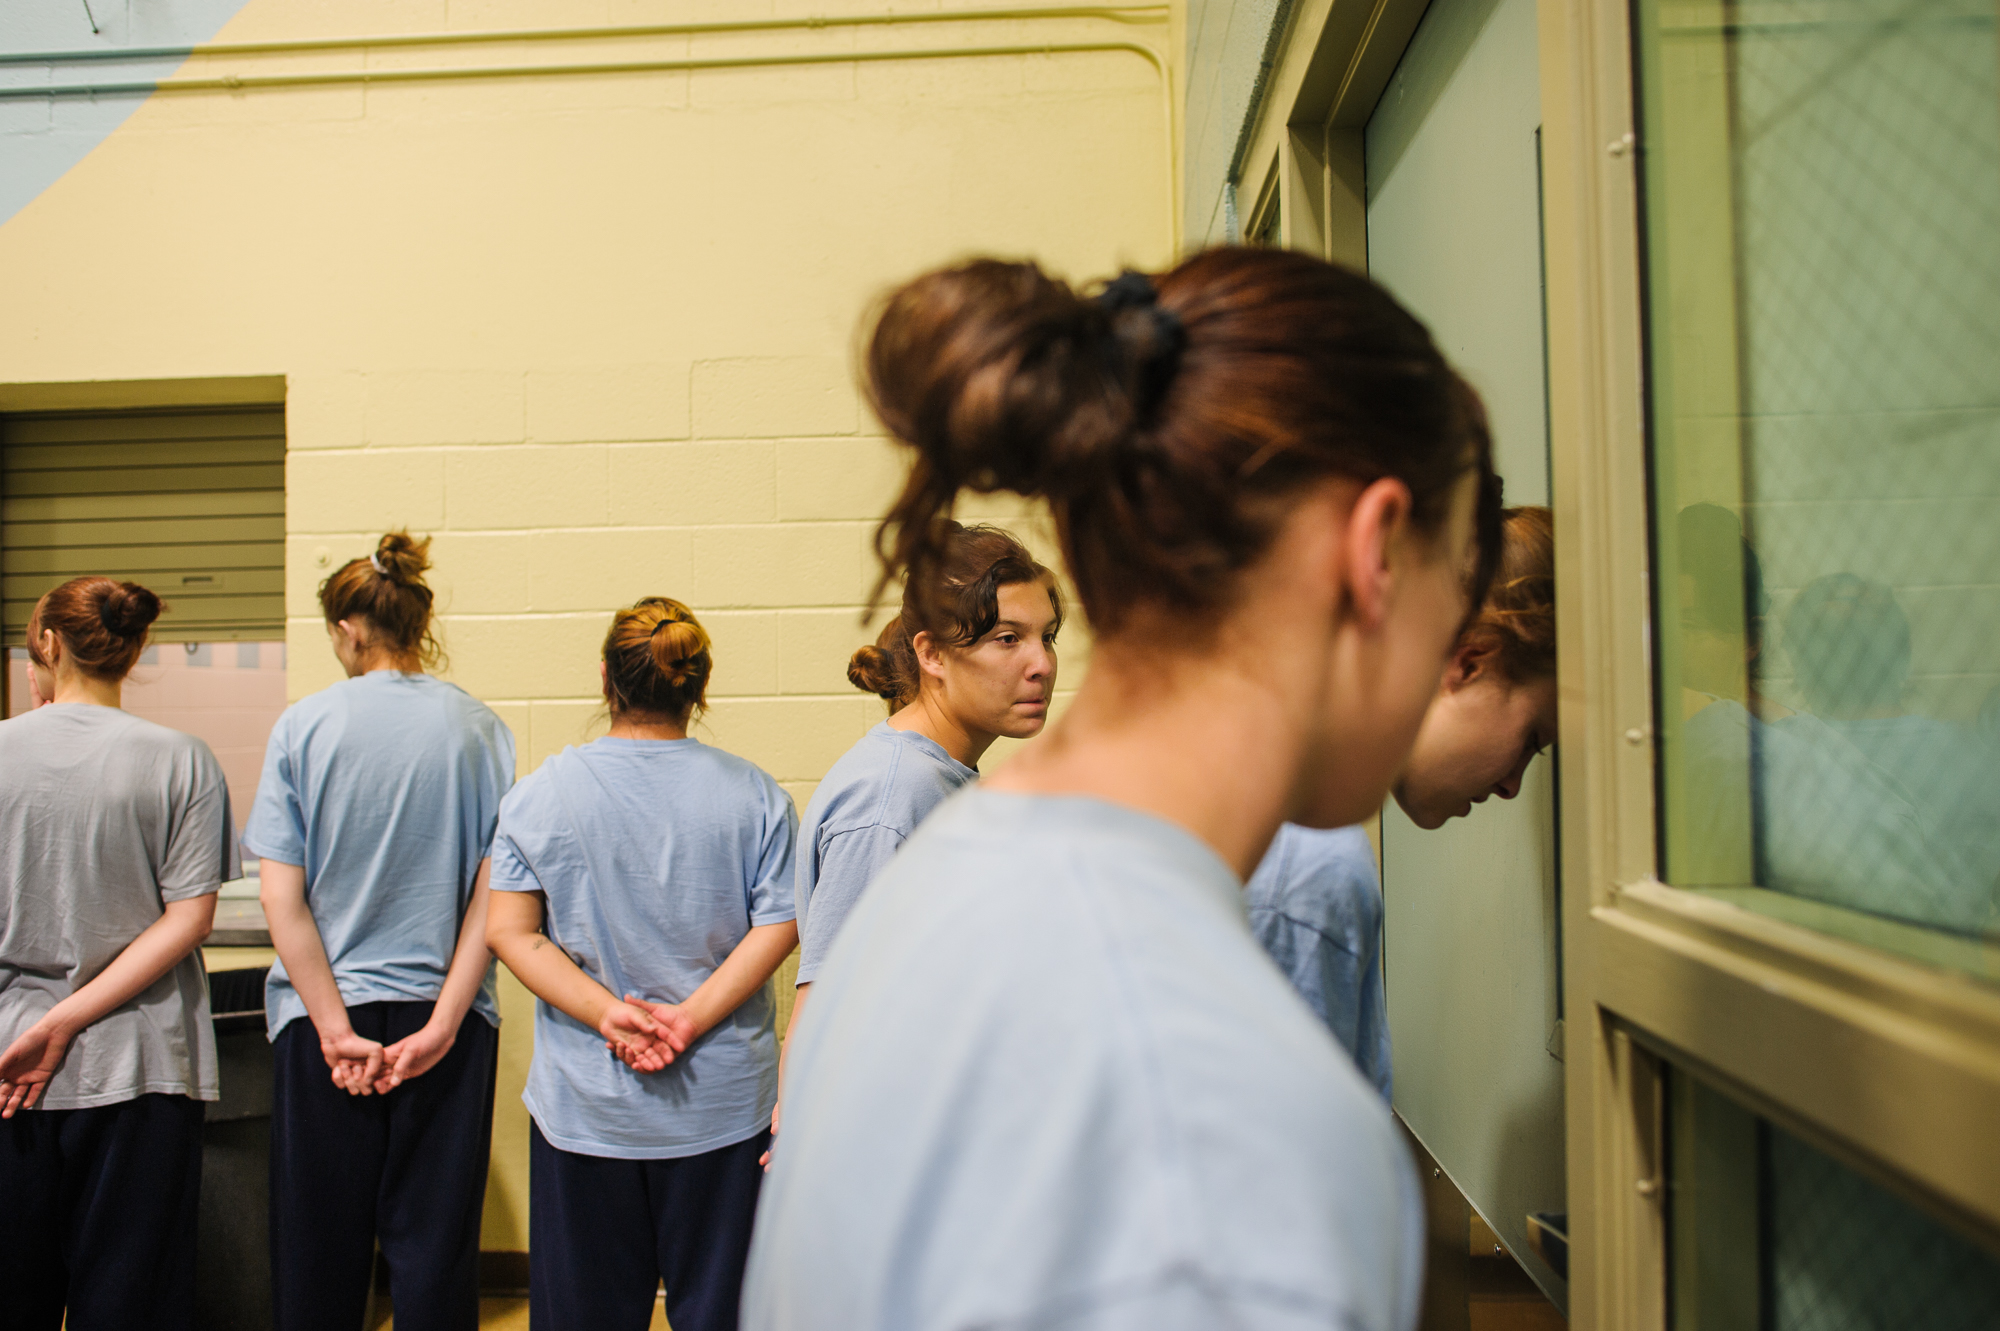  Alysia, age 16, leans her head against a door as she stands in line with other girls in the cafeteria of the juvenile detention center in Albuquerque, NM. 